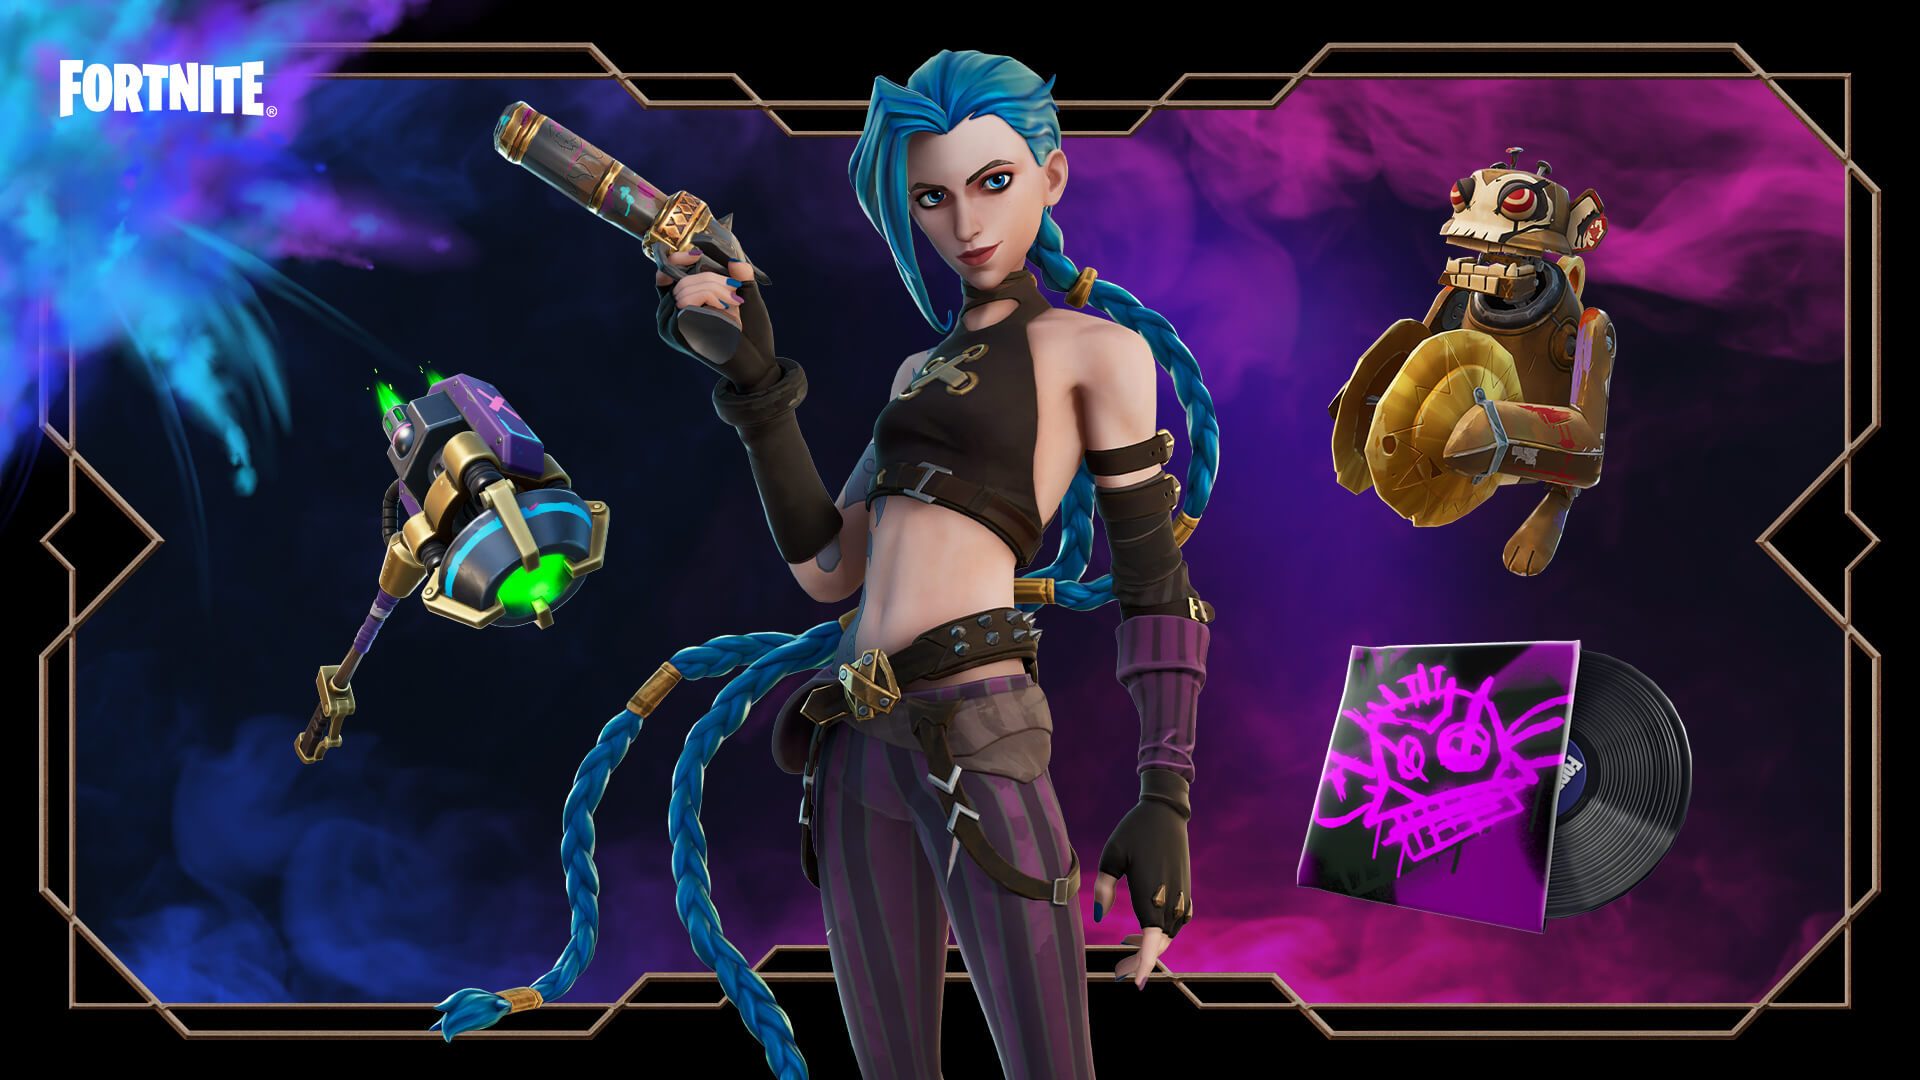 From League of Legends and Arcane, Jinx Brings Her Aura of Anarchy to Fortnite